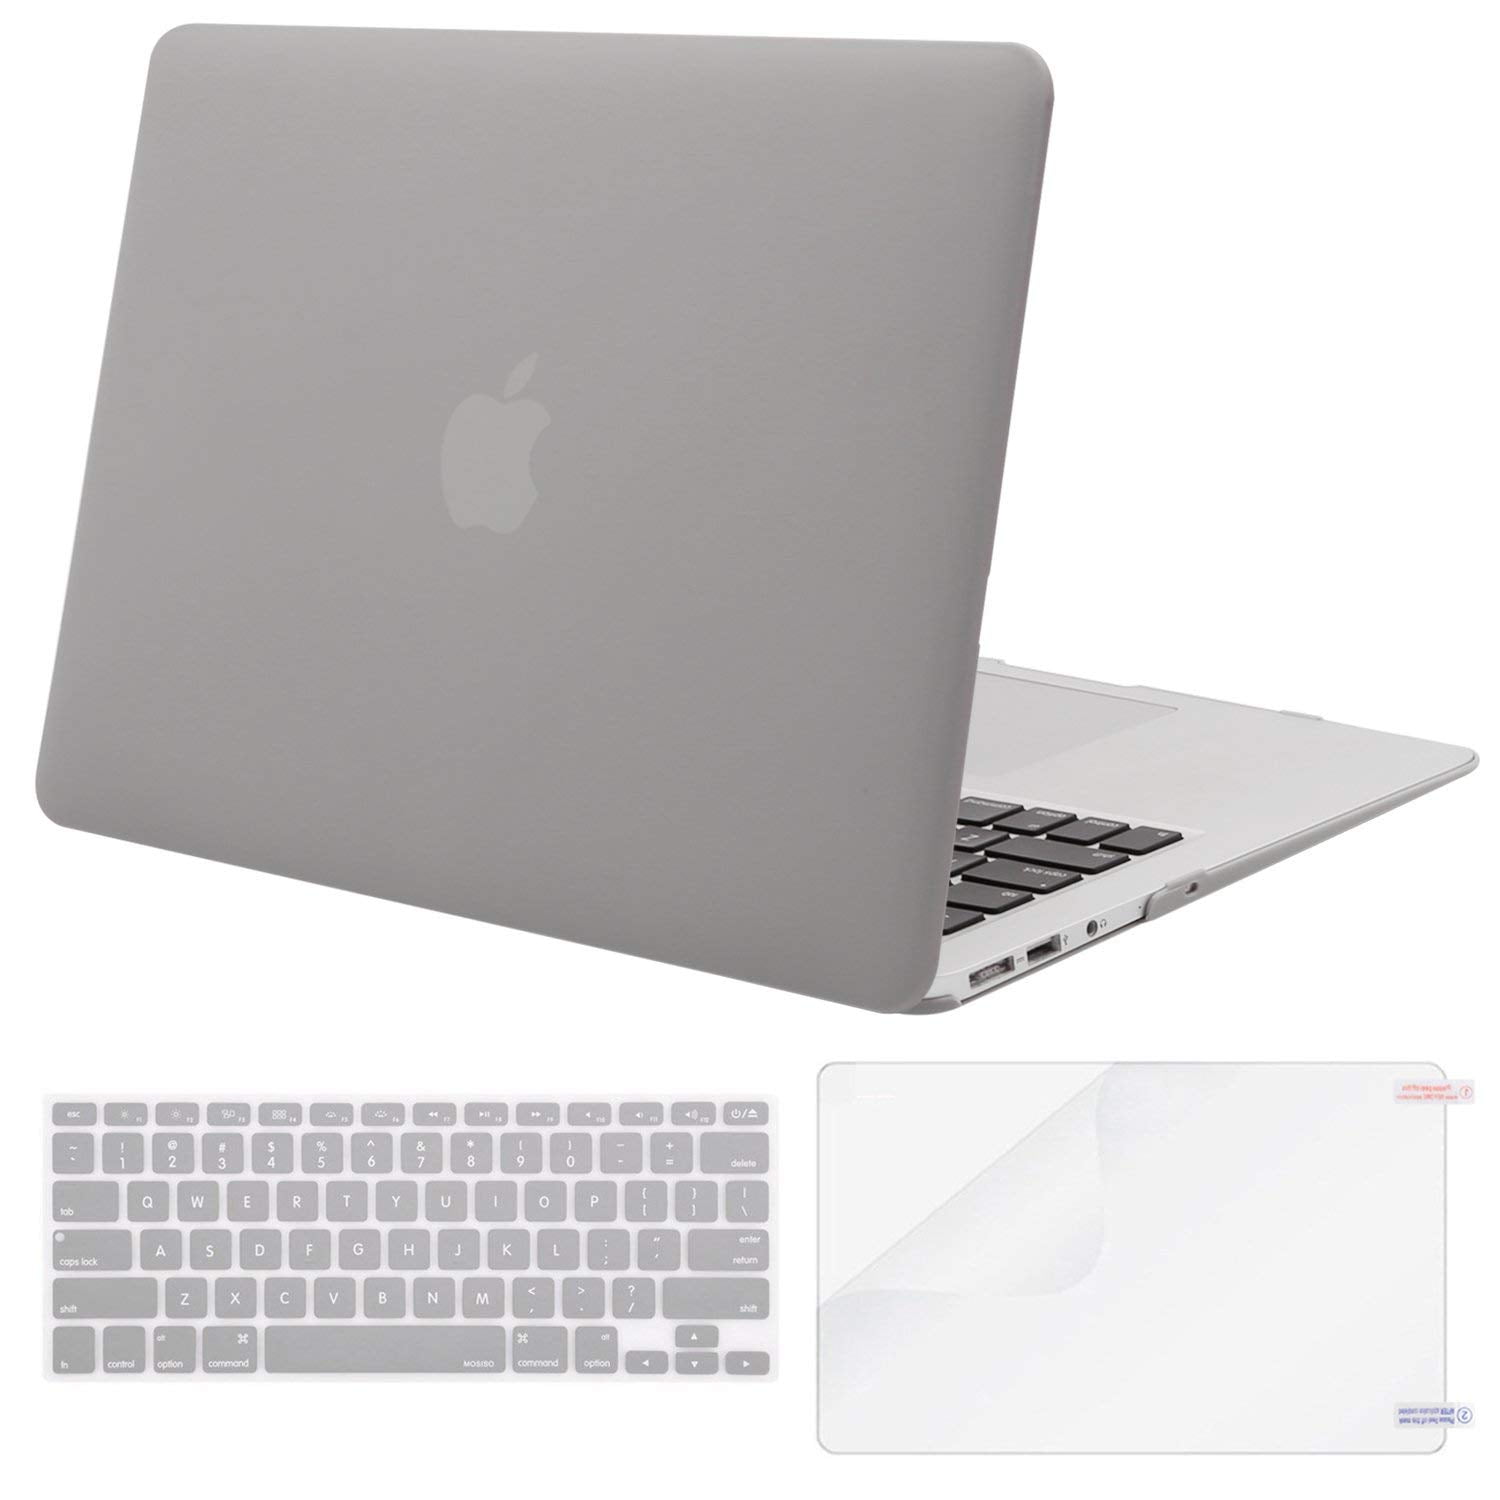 Gray Crystal Hard Plastic Case Cover For Macbook Pro 13/13.3inch Laptop Shell 